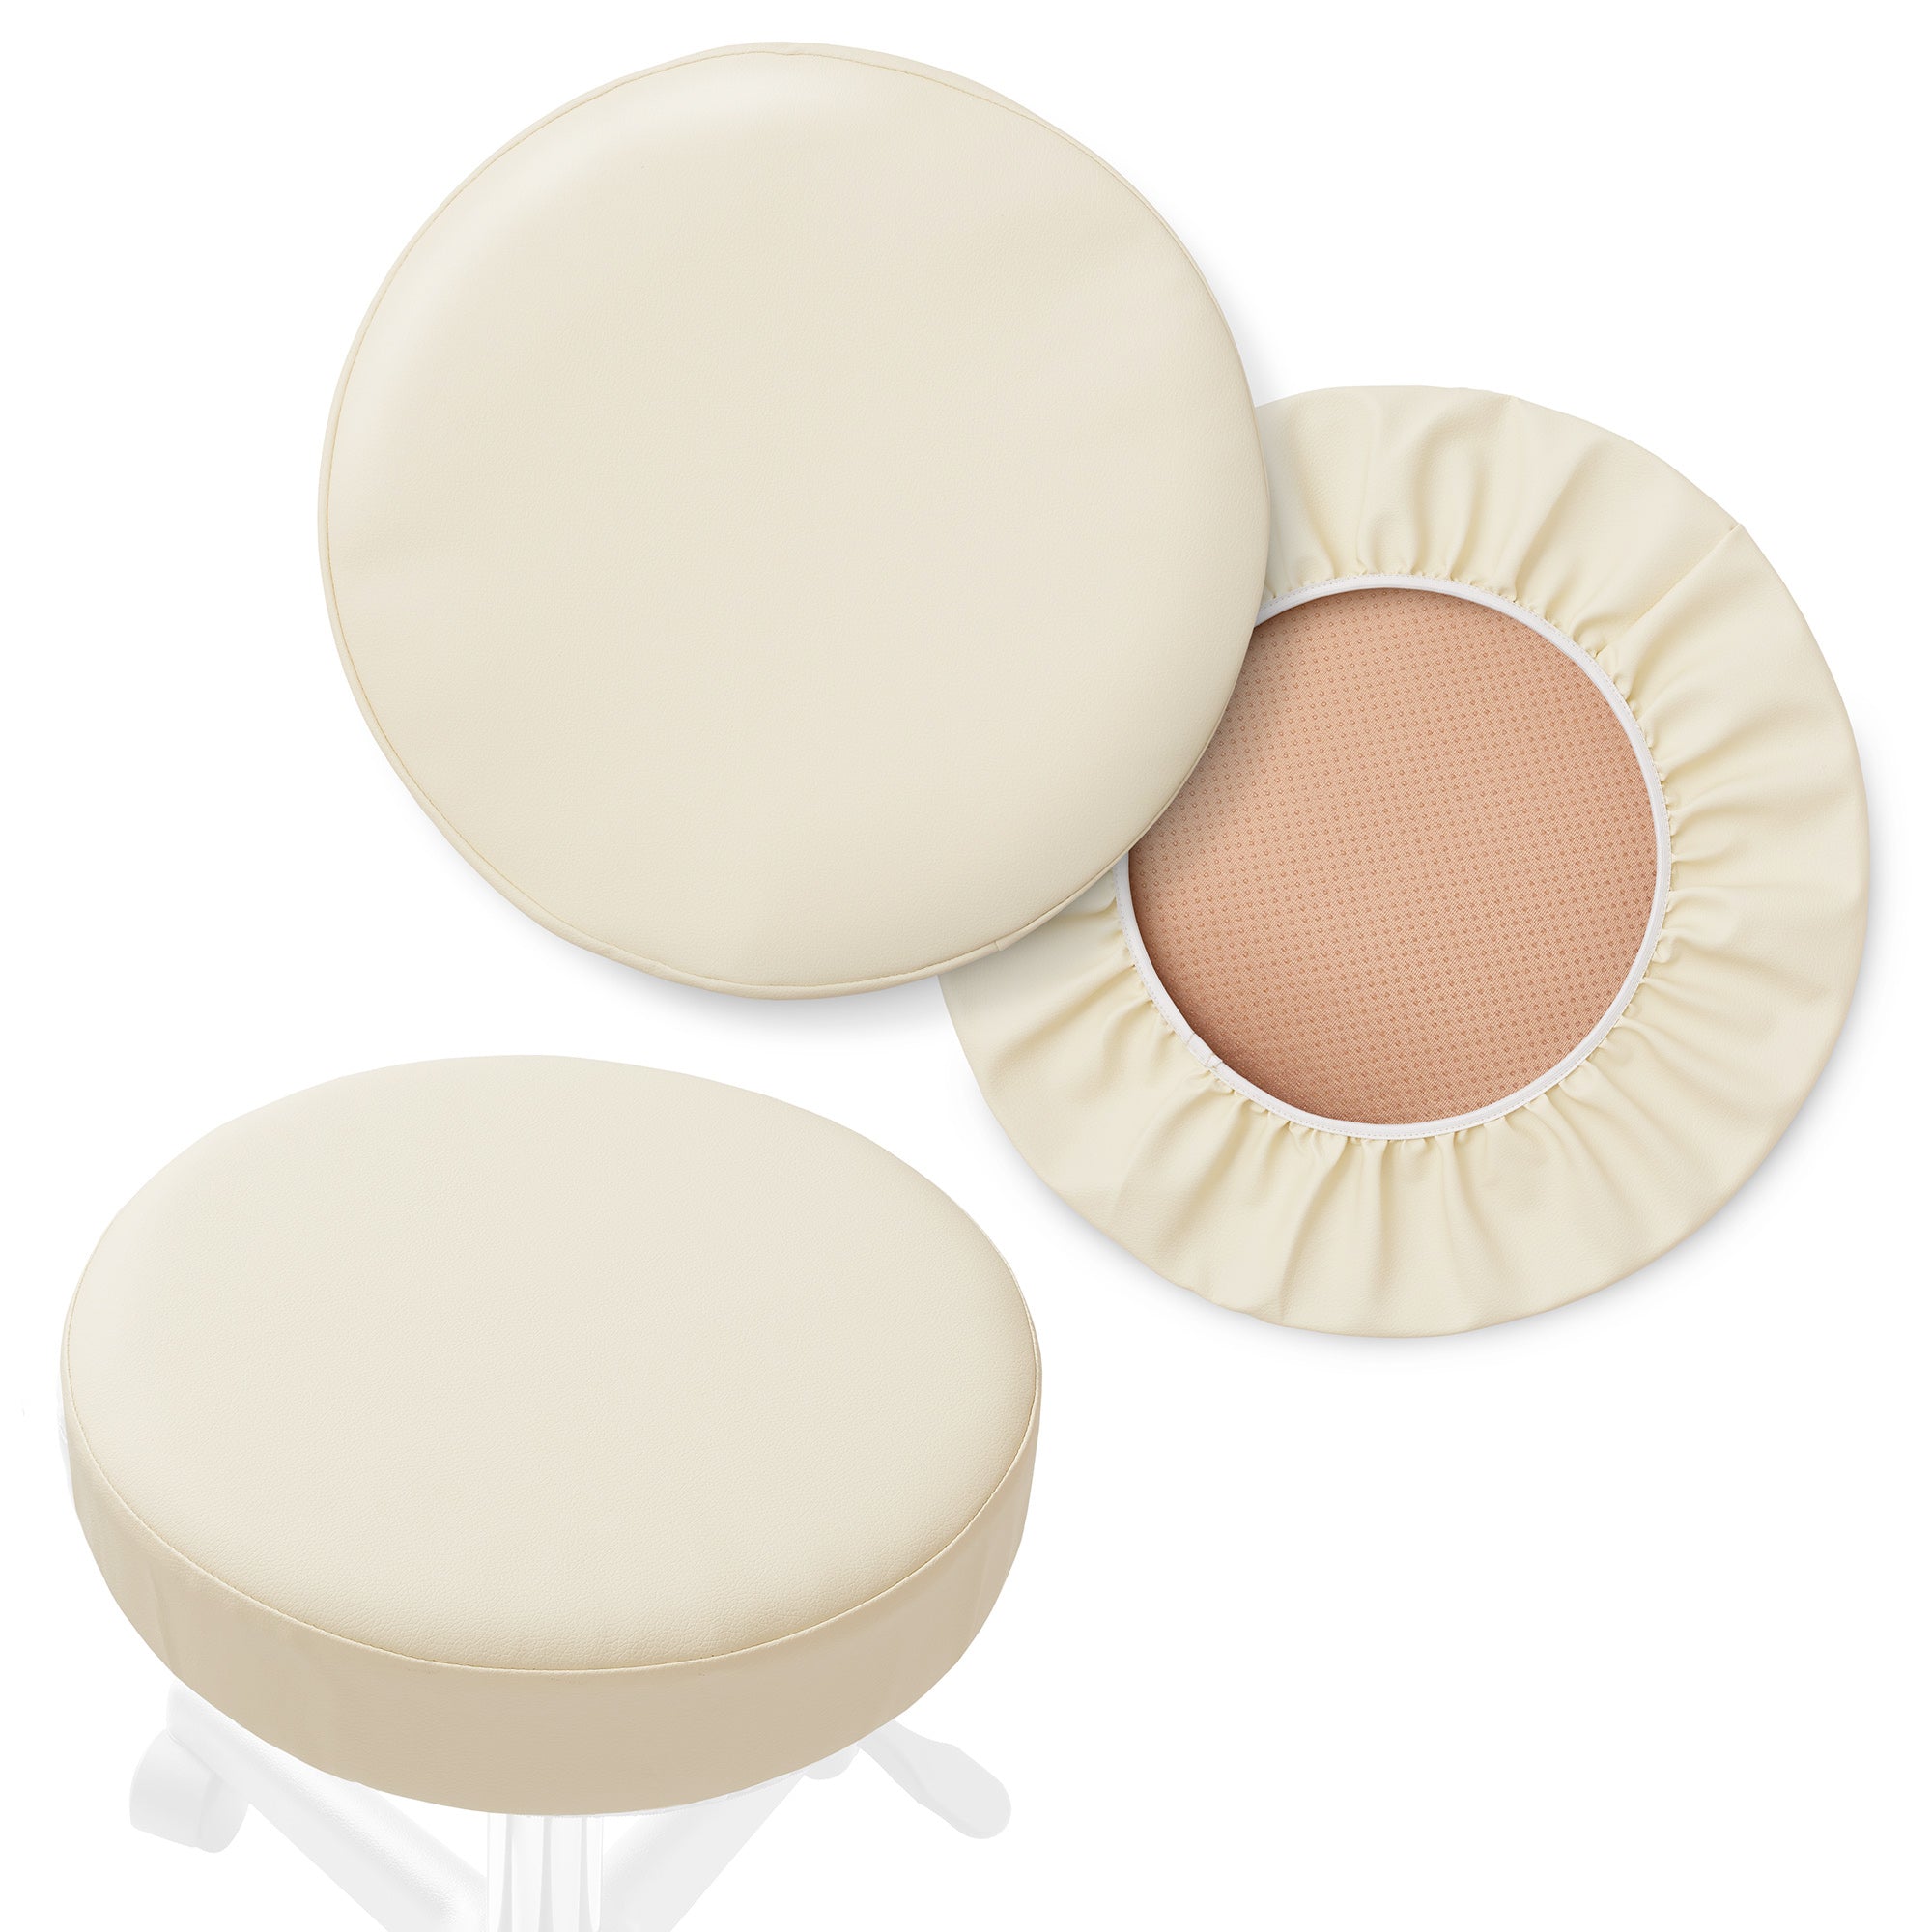 2-Pk Round Stool Seat Cover, Slipcover for Swivel Chair